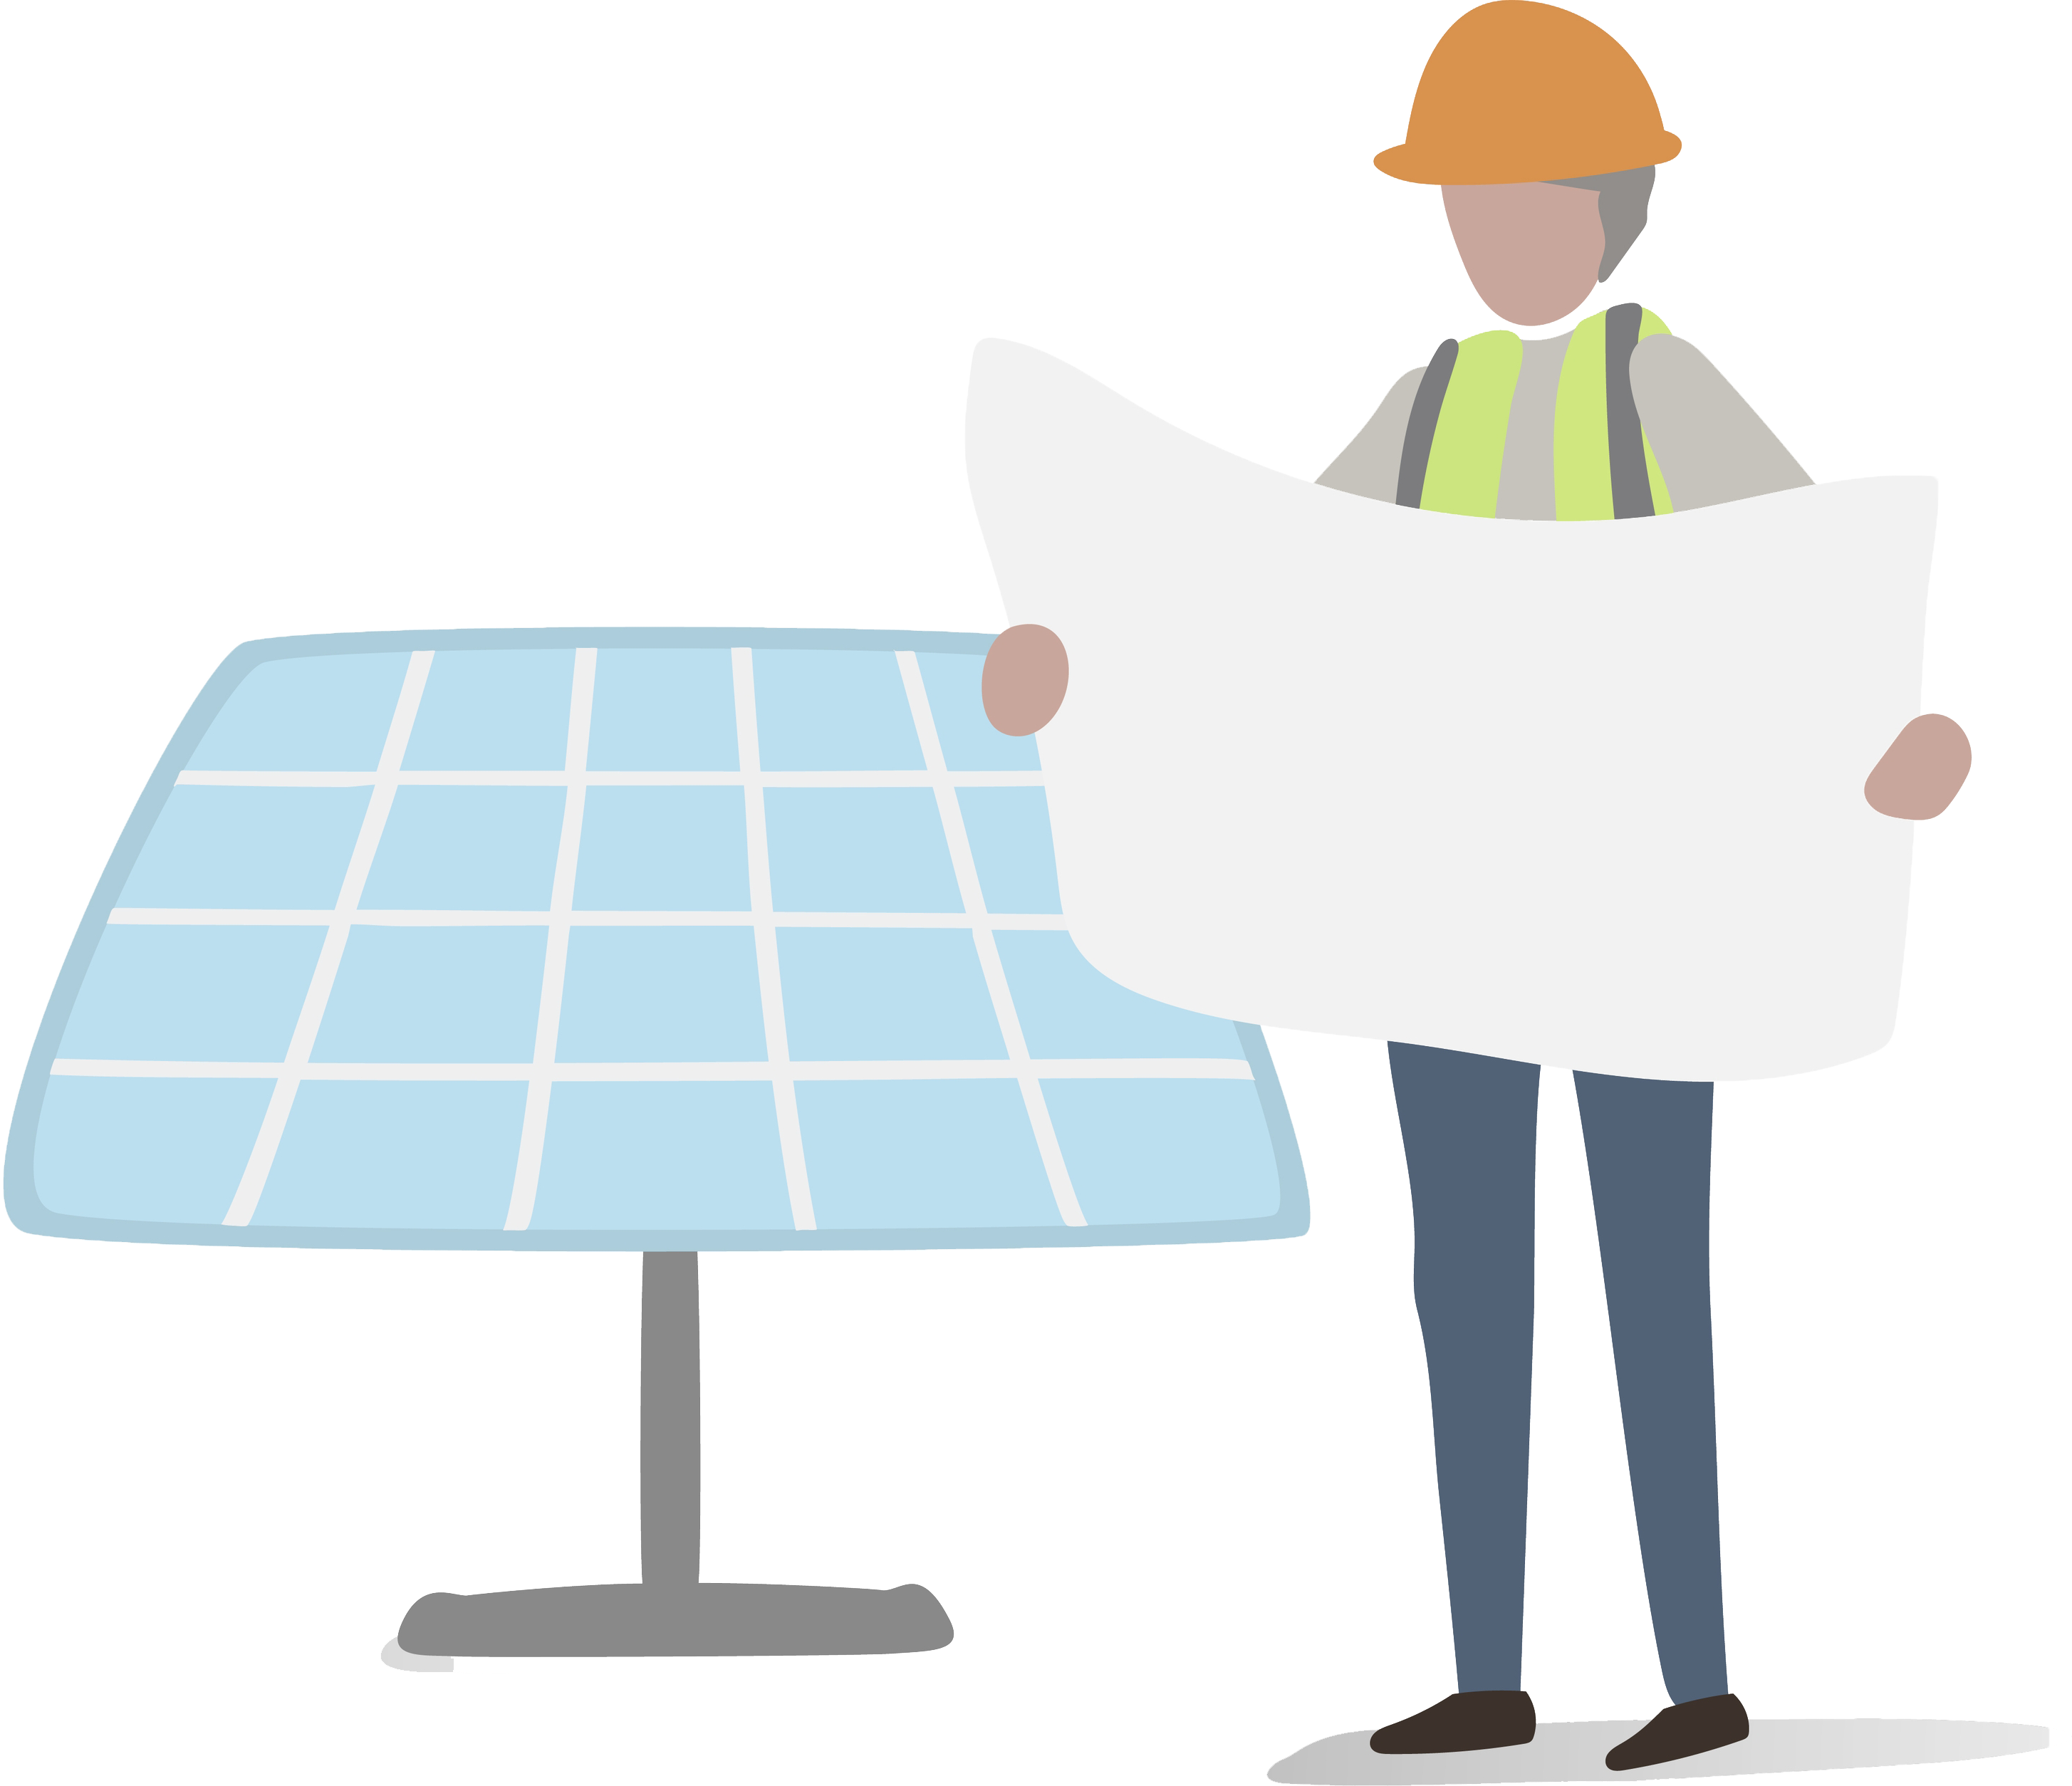 Design and installation of solar stations